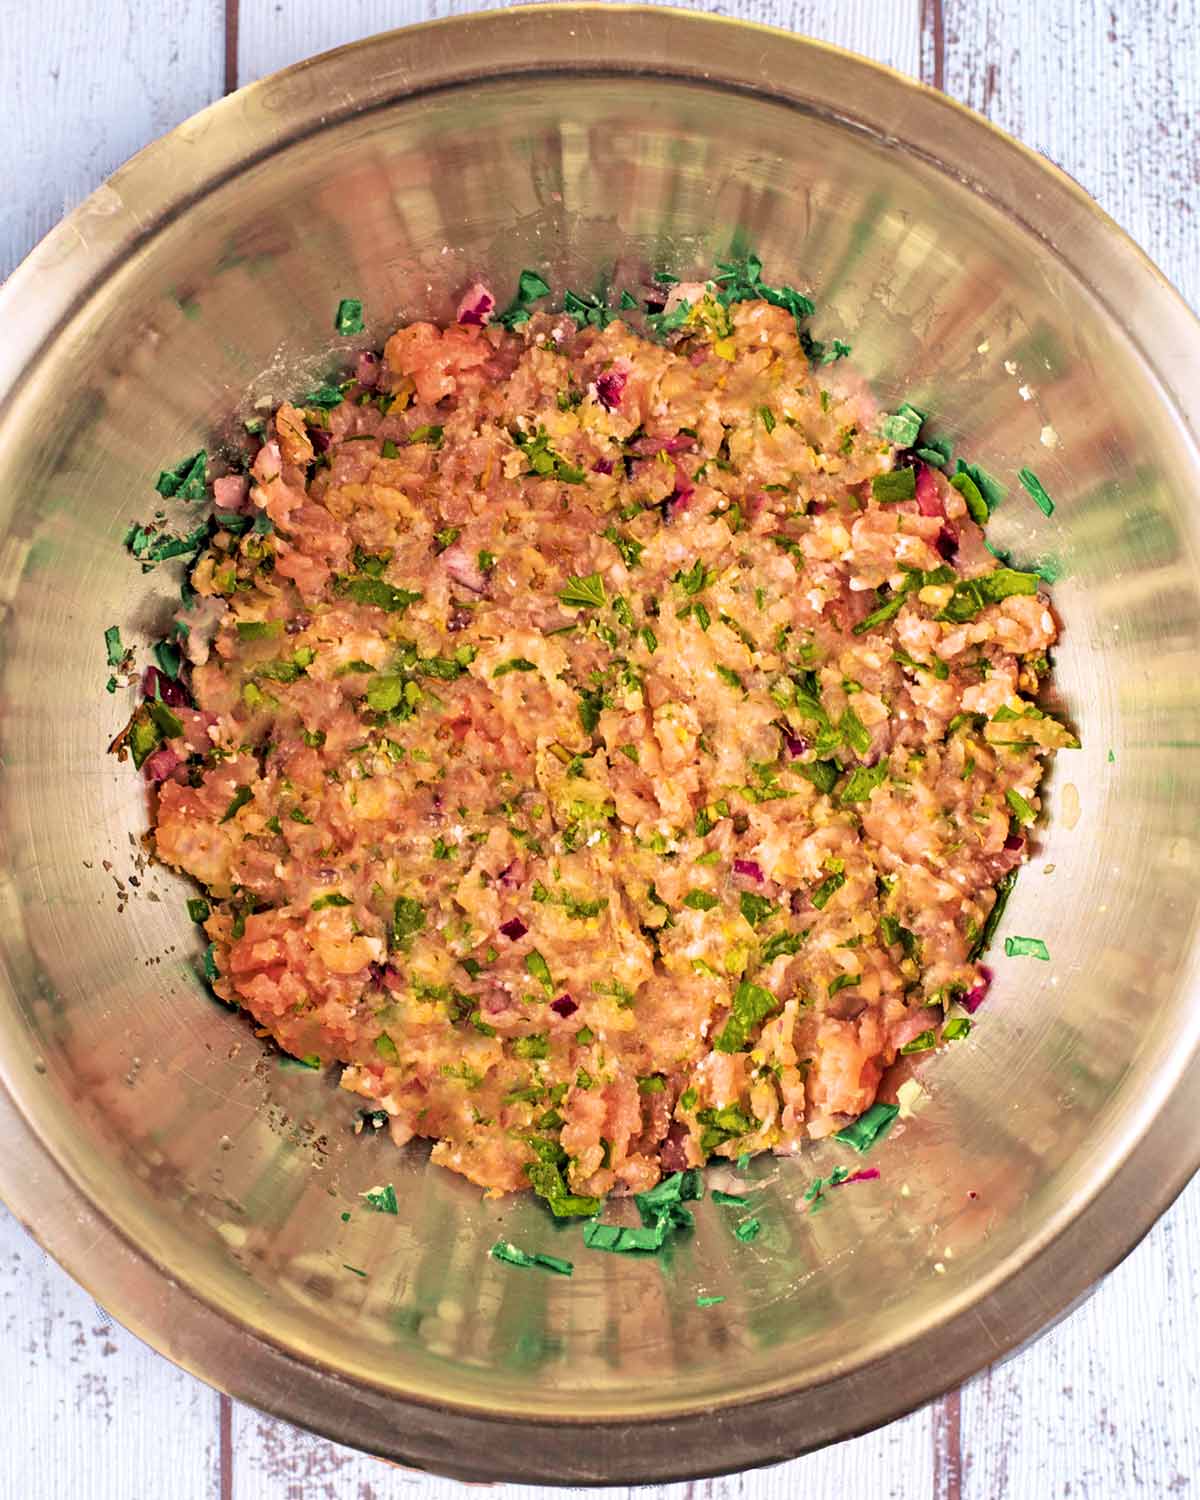 Lamb mince, spices and herbs mixed together in a bowl.